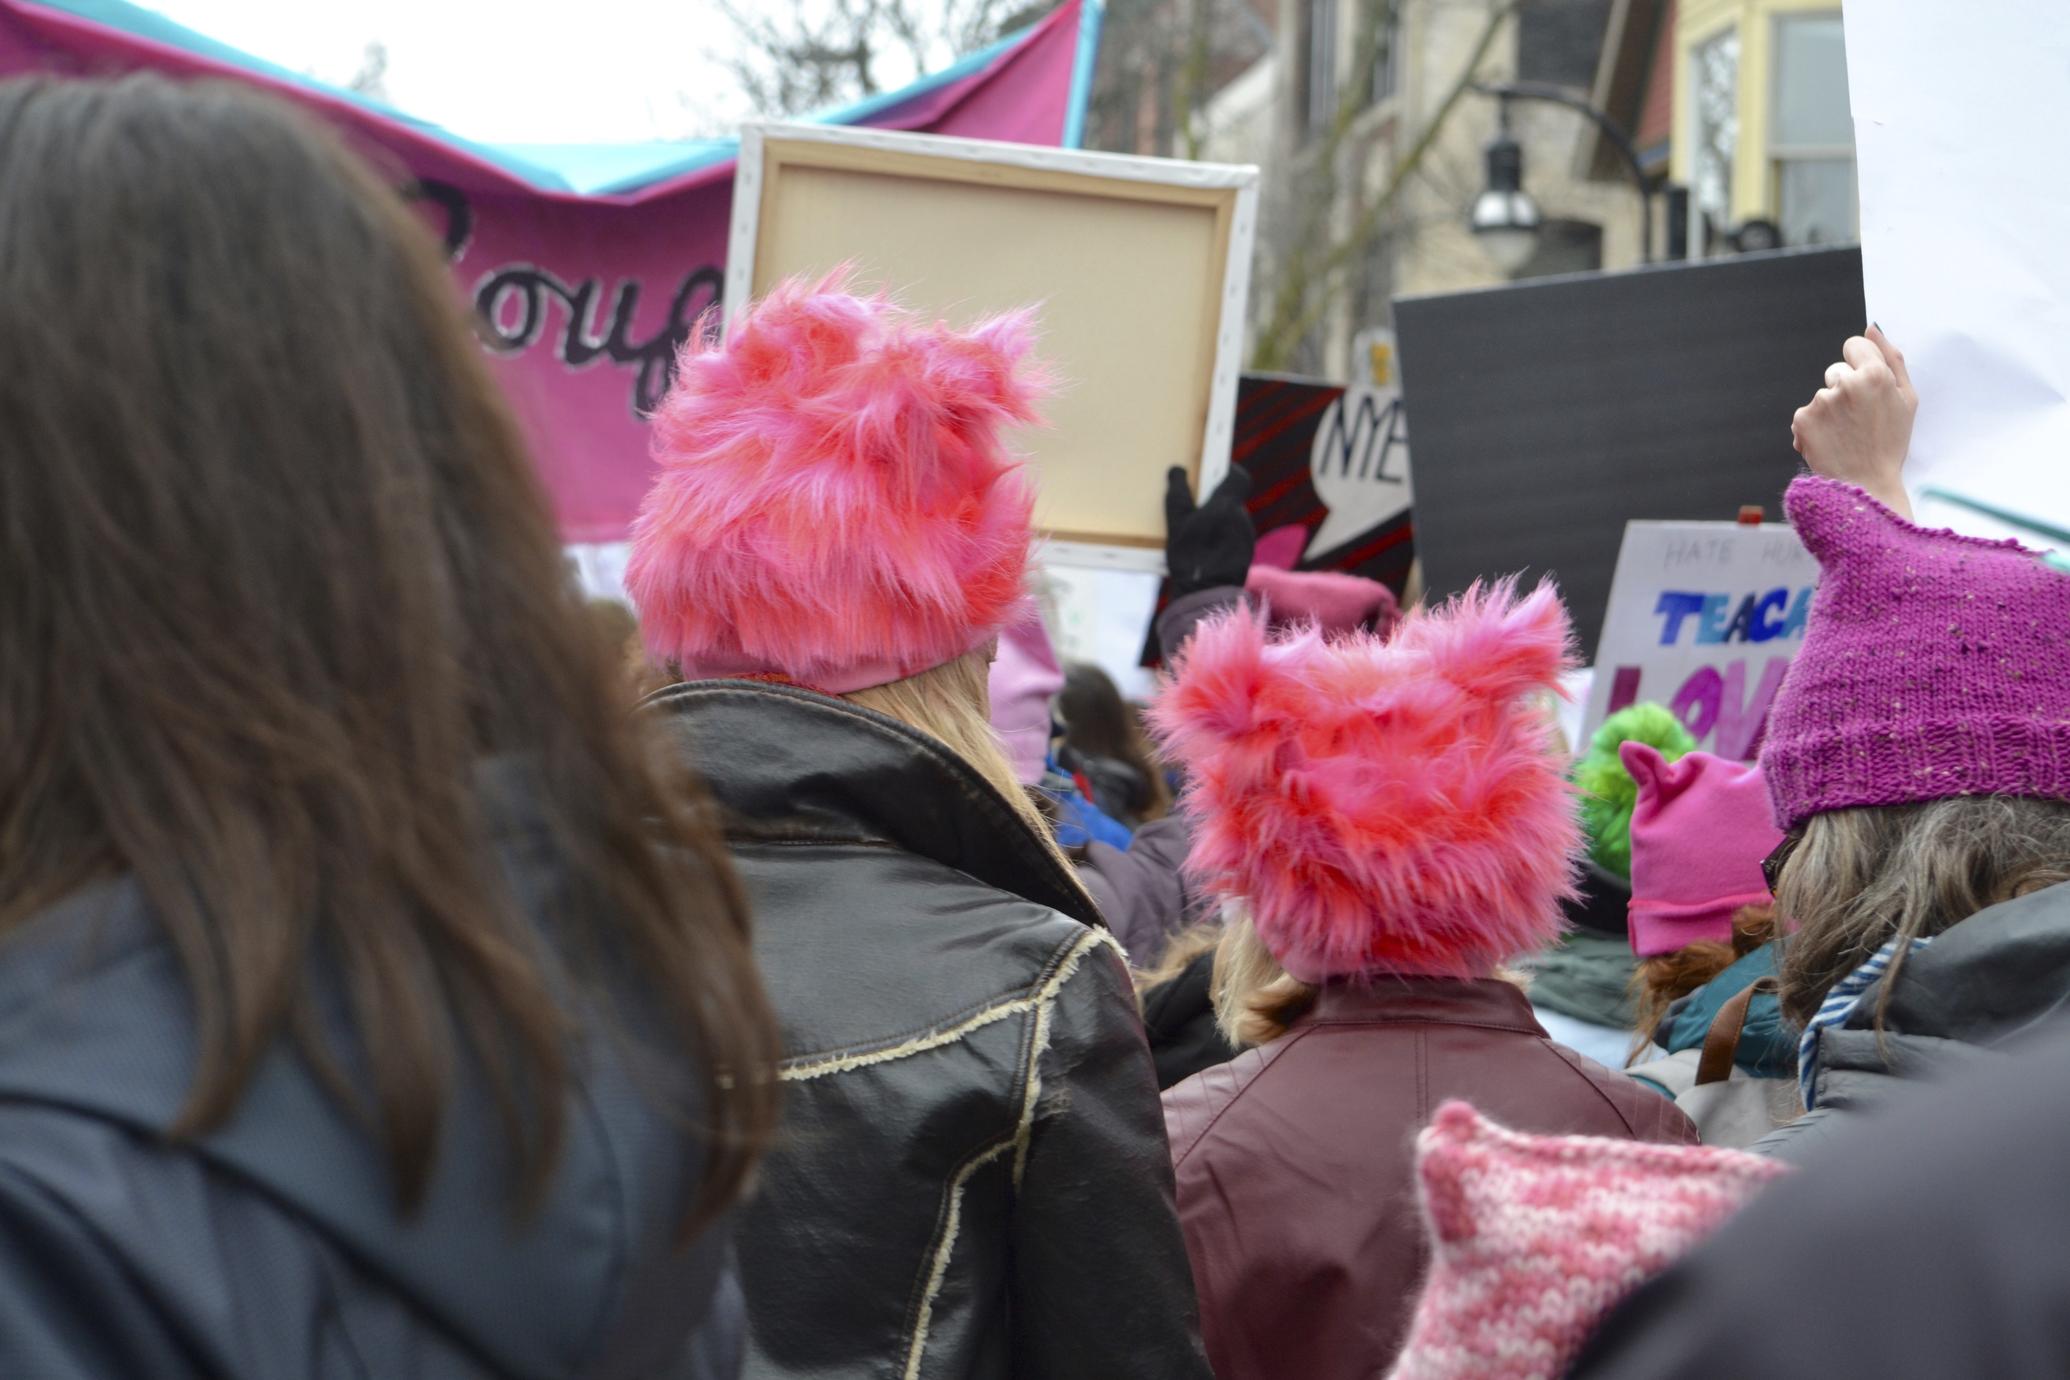 Protesters in fluffy pussy hats